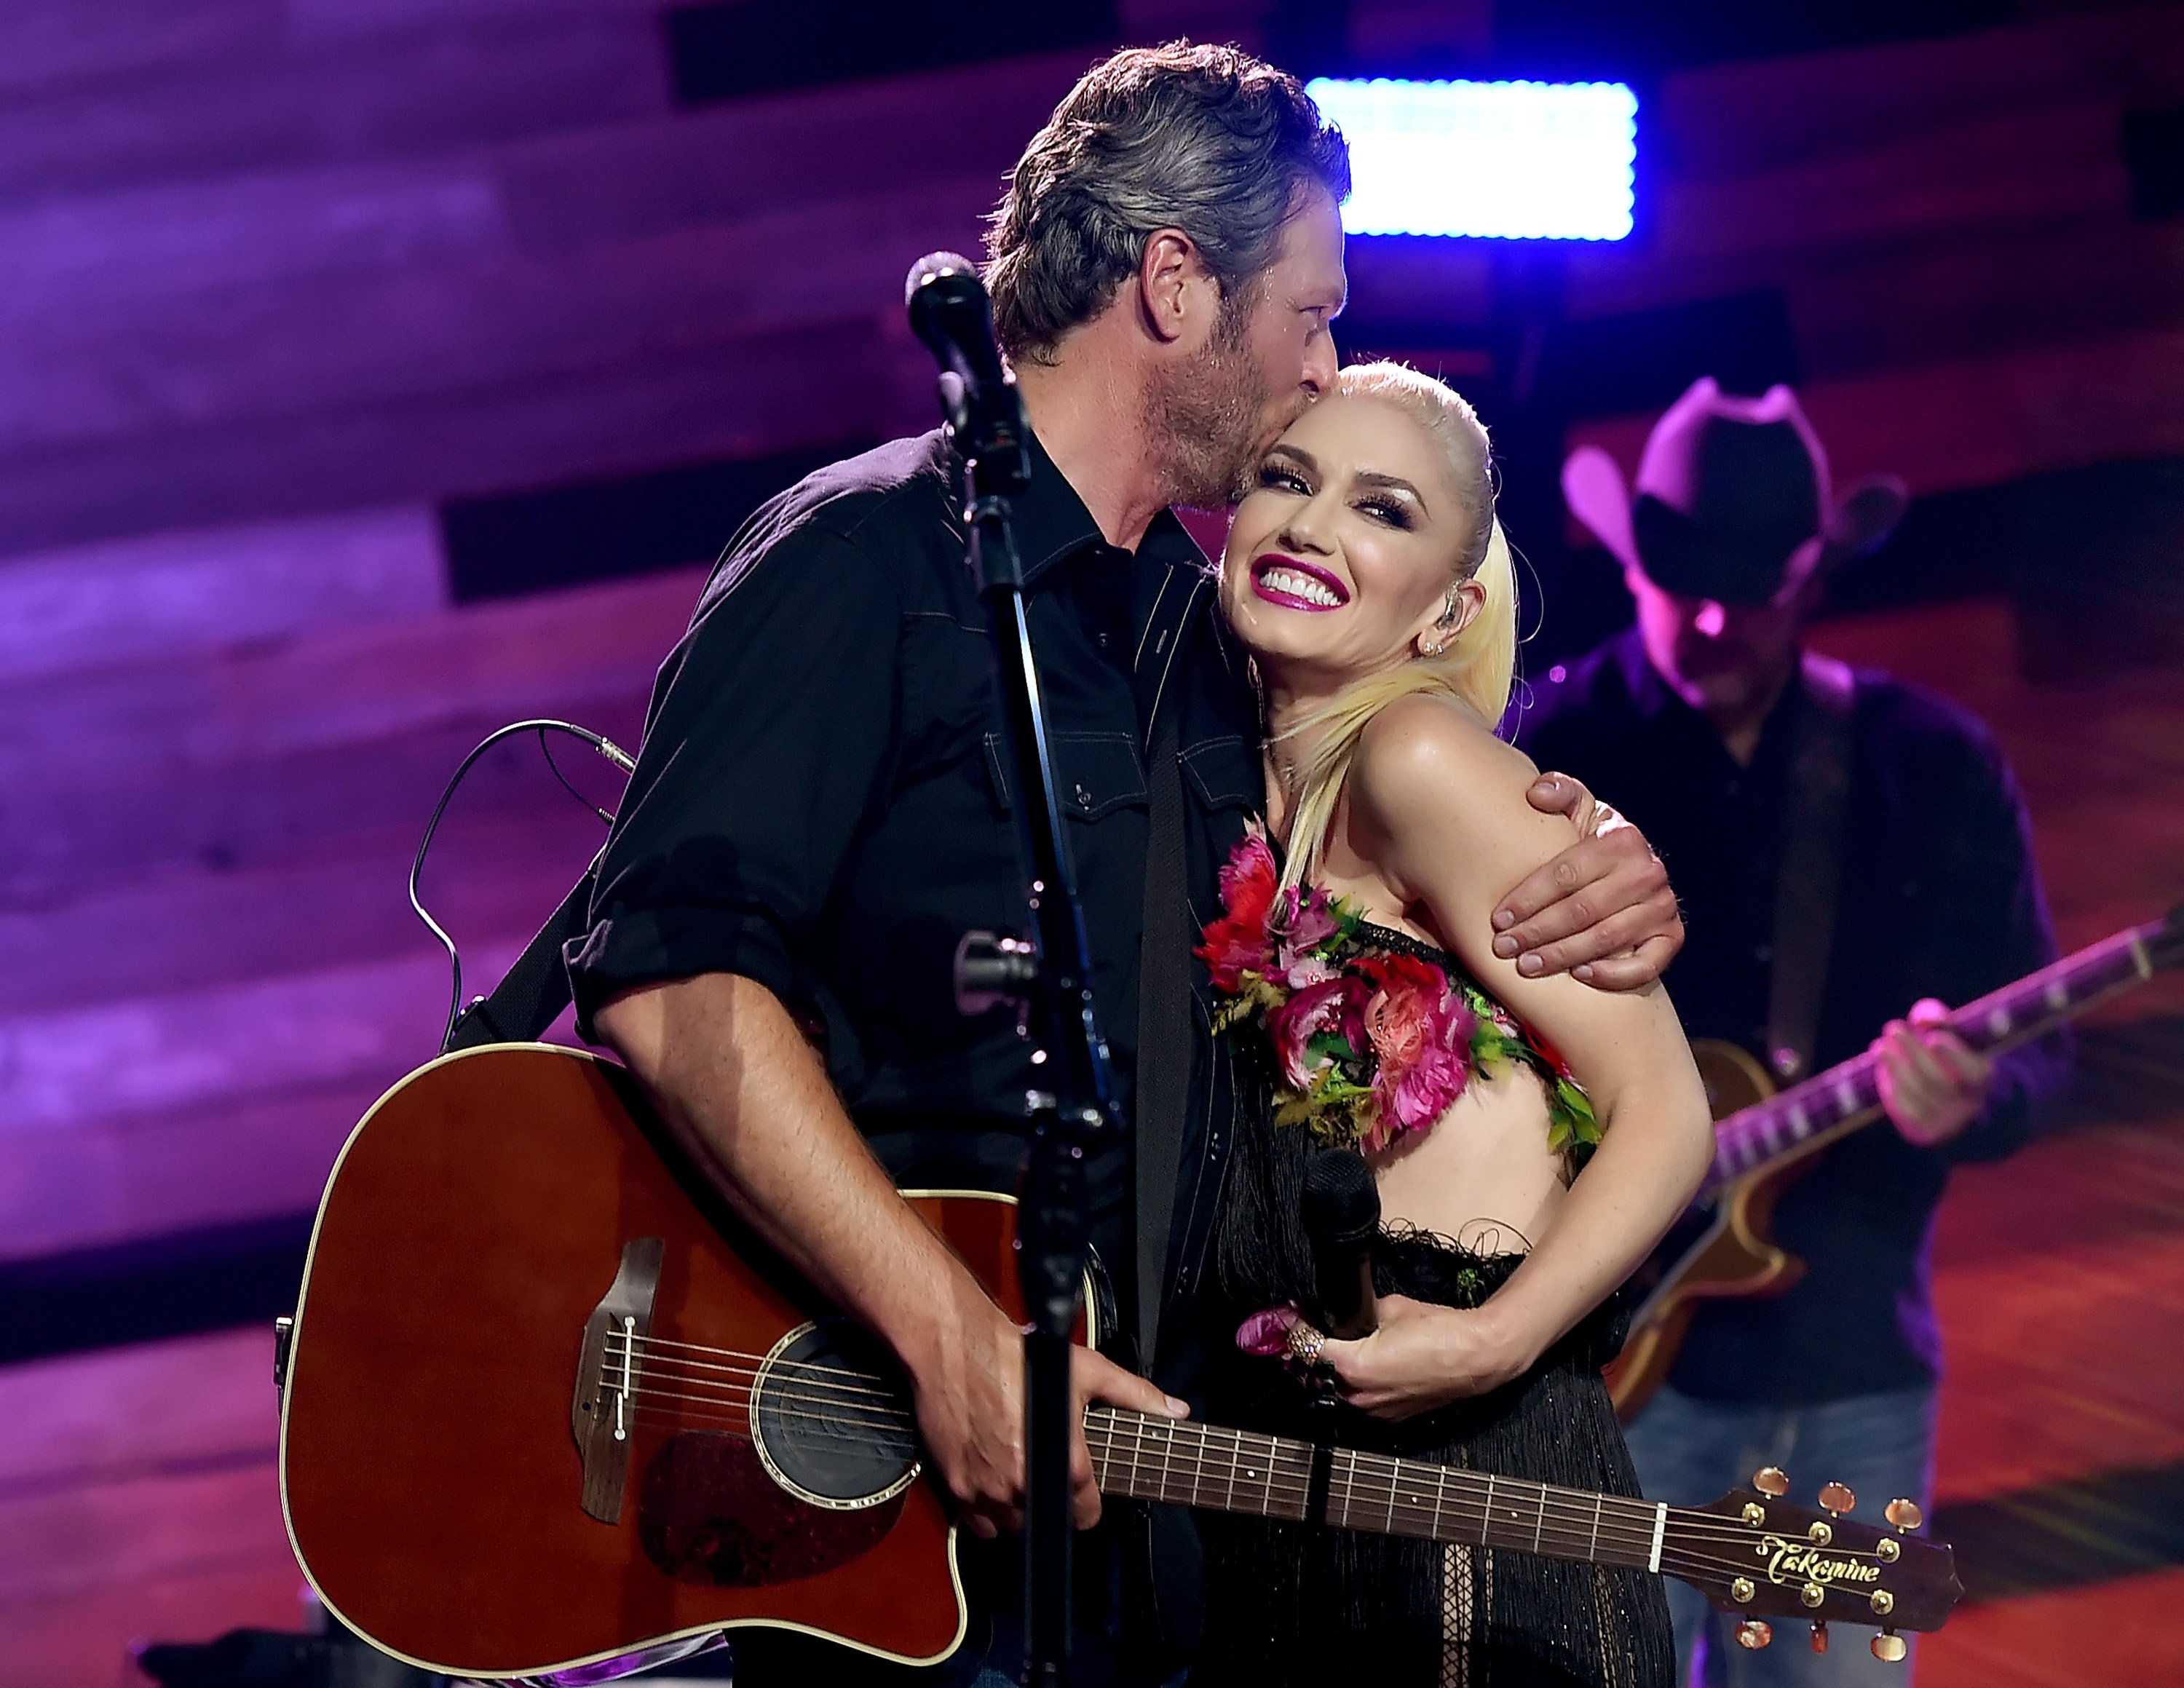 Blake Shelton  and Gwen Stefani perform on the Honda Stage at the iHeartRadio Theater on May 9, 2016 | Photo: GettyImages